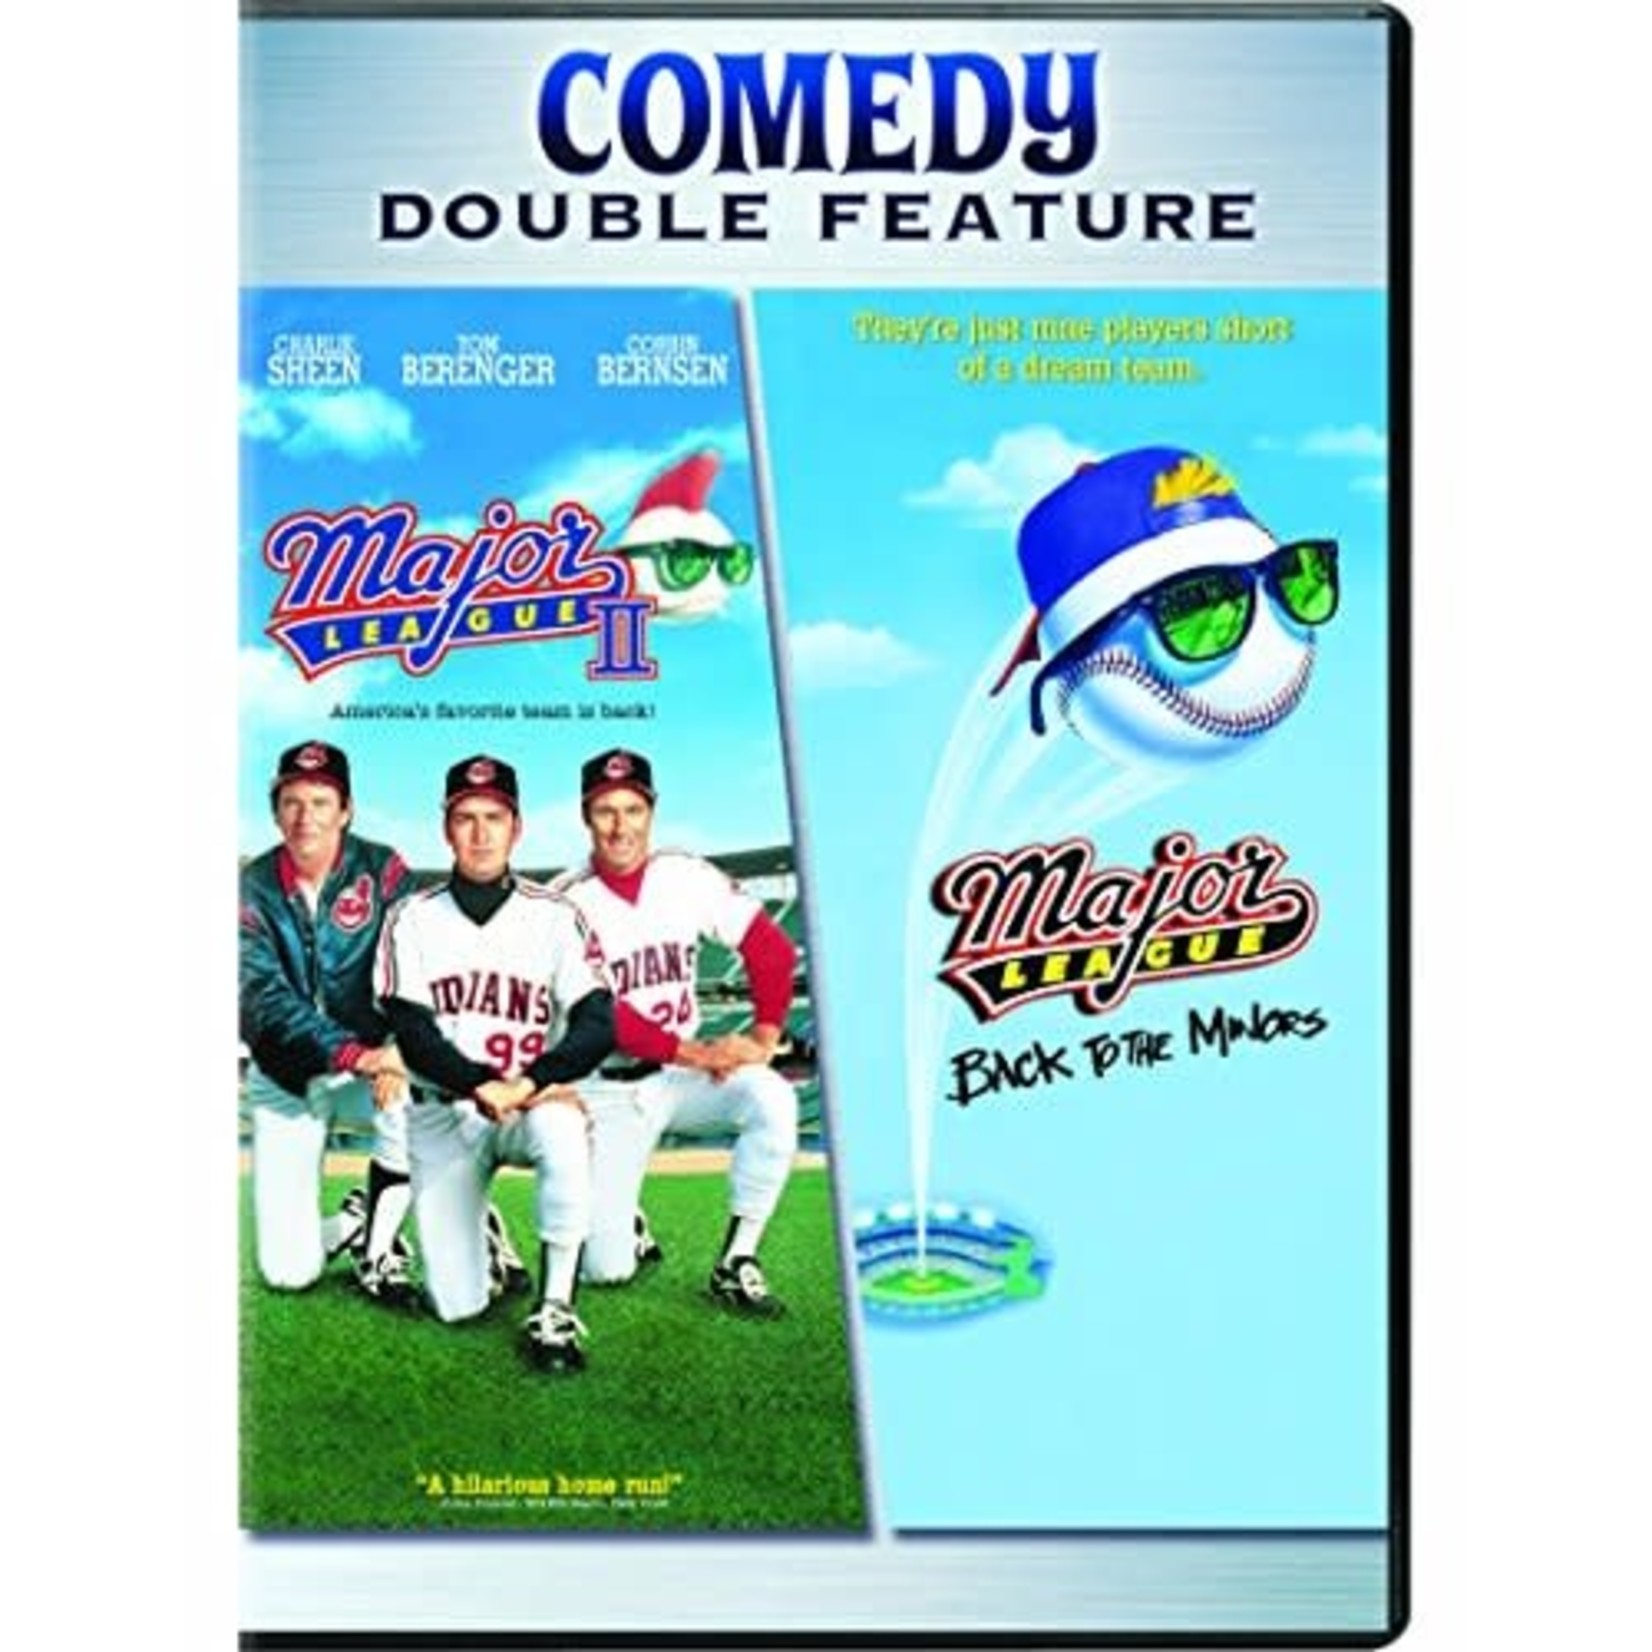 Major League 2/3 - Double Feature [USED DVD]